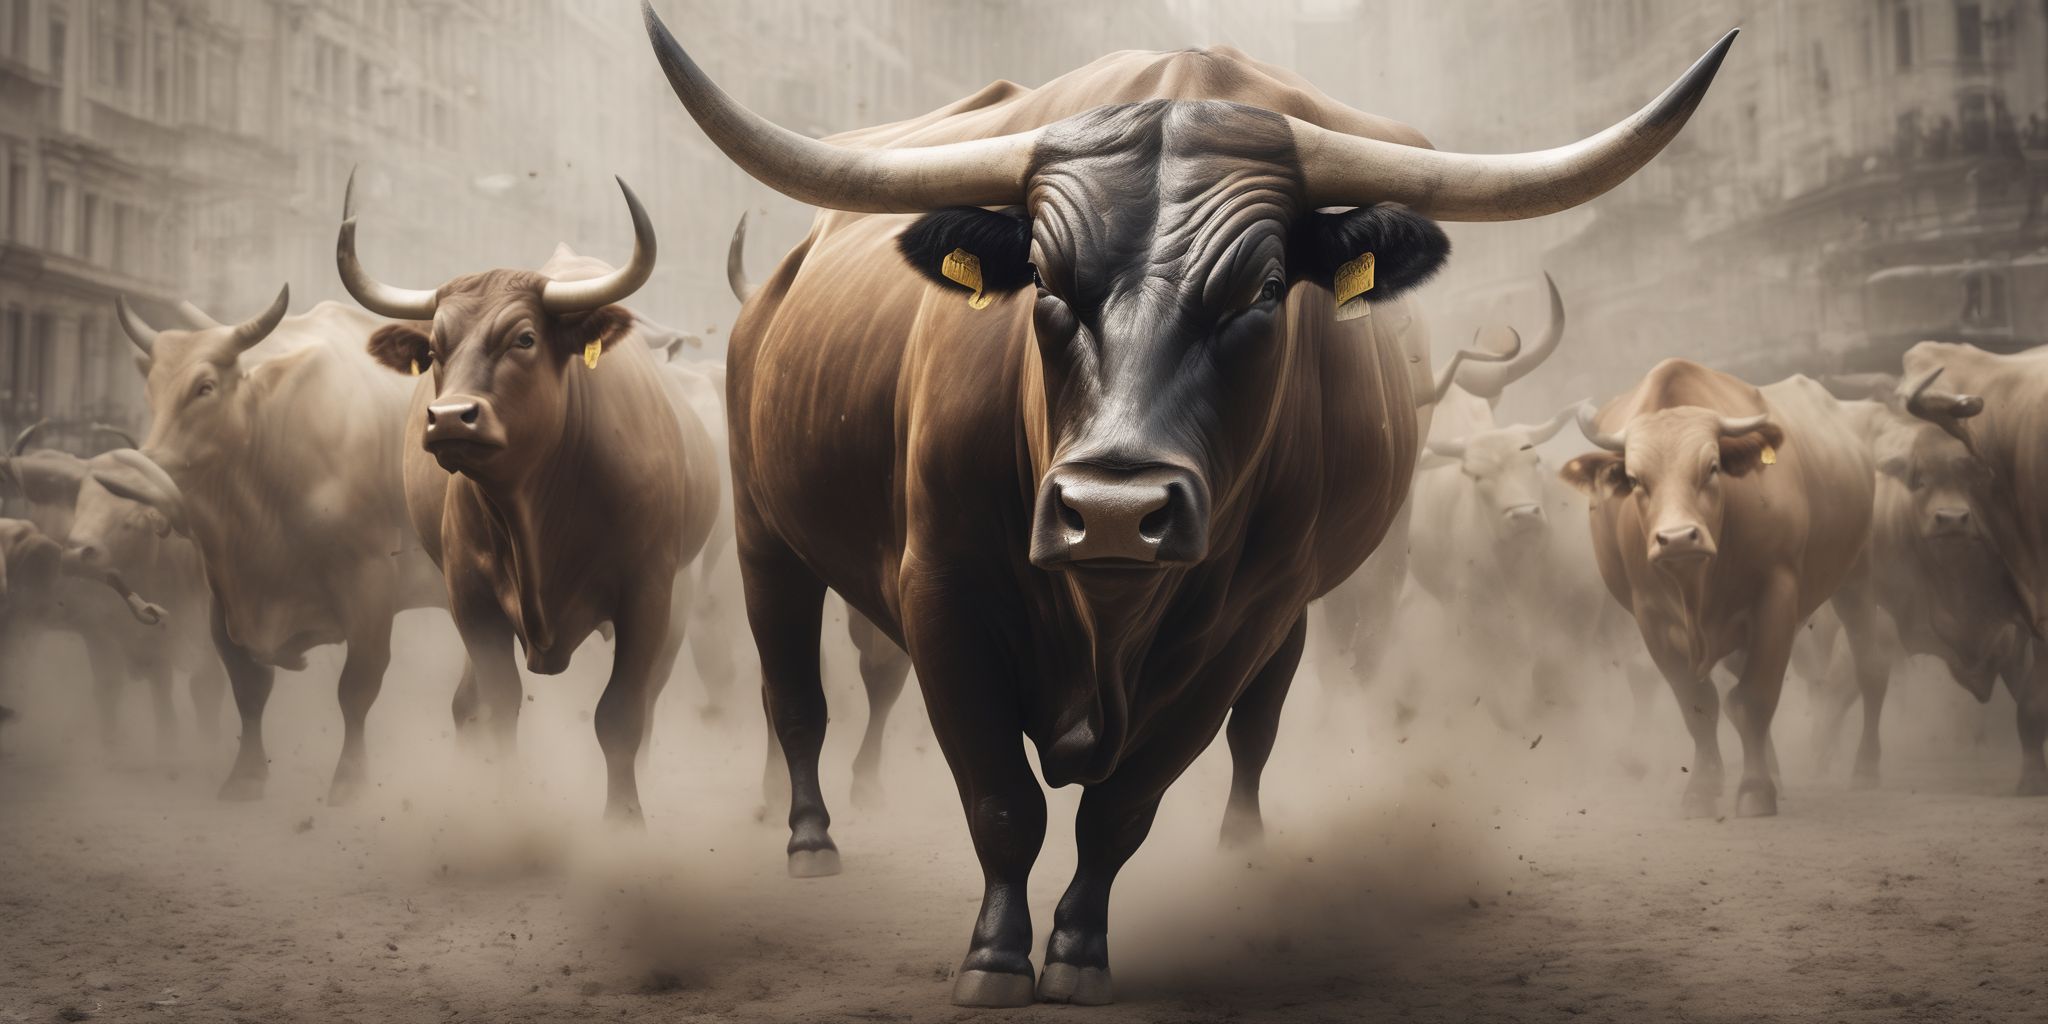 Bull market  in realistic, photographic style